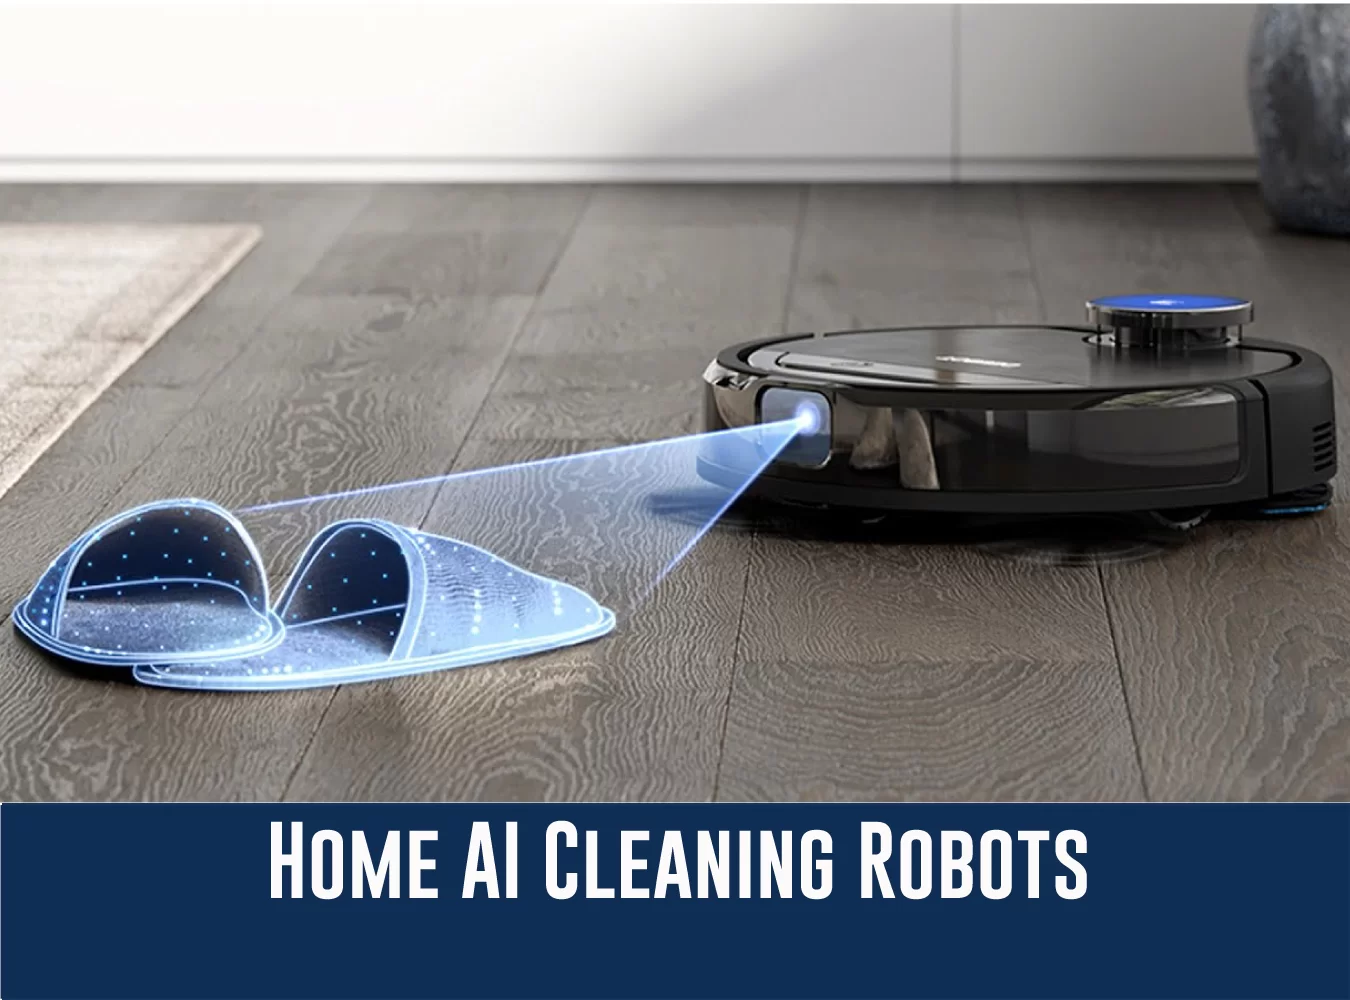 Home AI Cleaning Robots 1